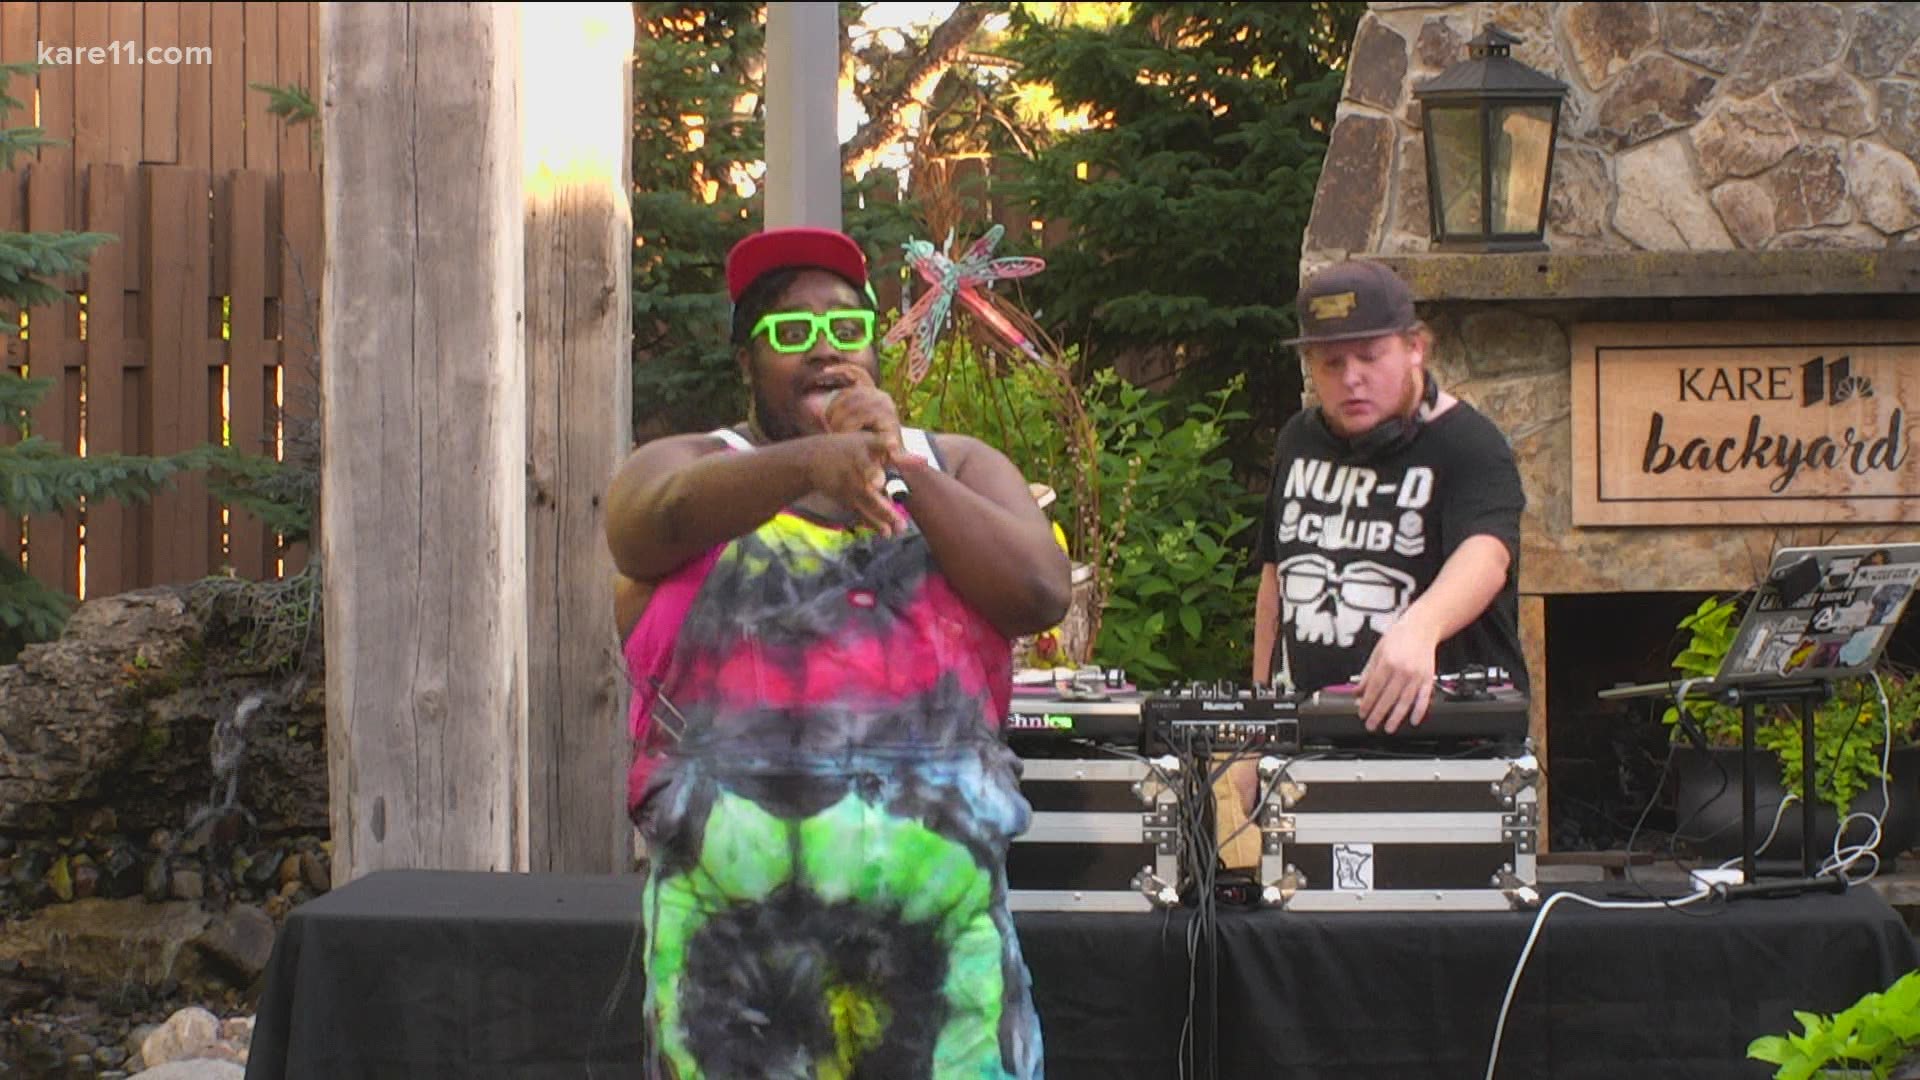 The KARE 11 backyard was rcokin' Friday morning with Nur-D on the mic